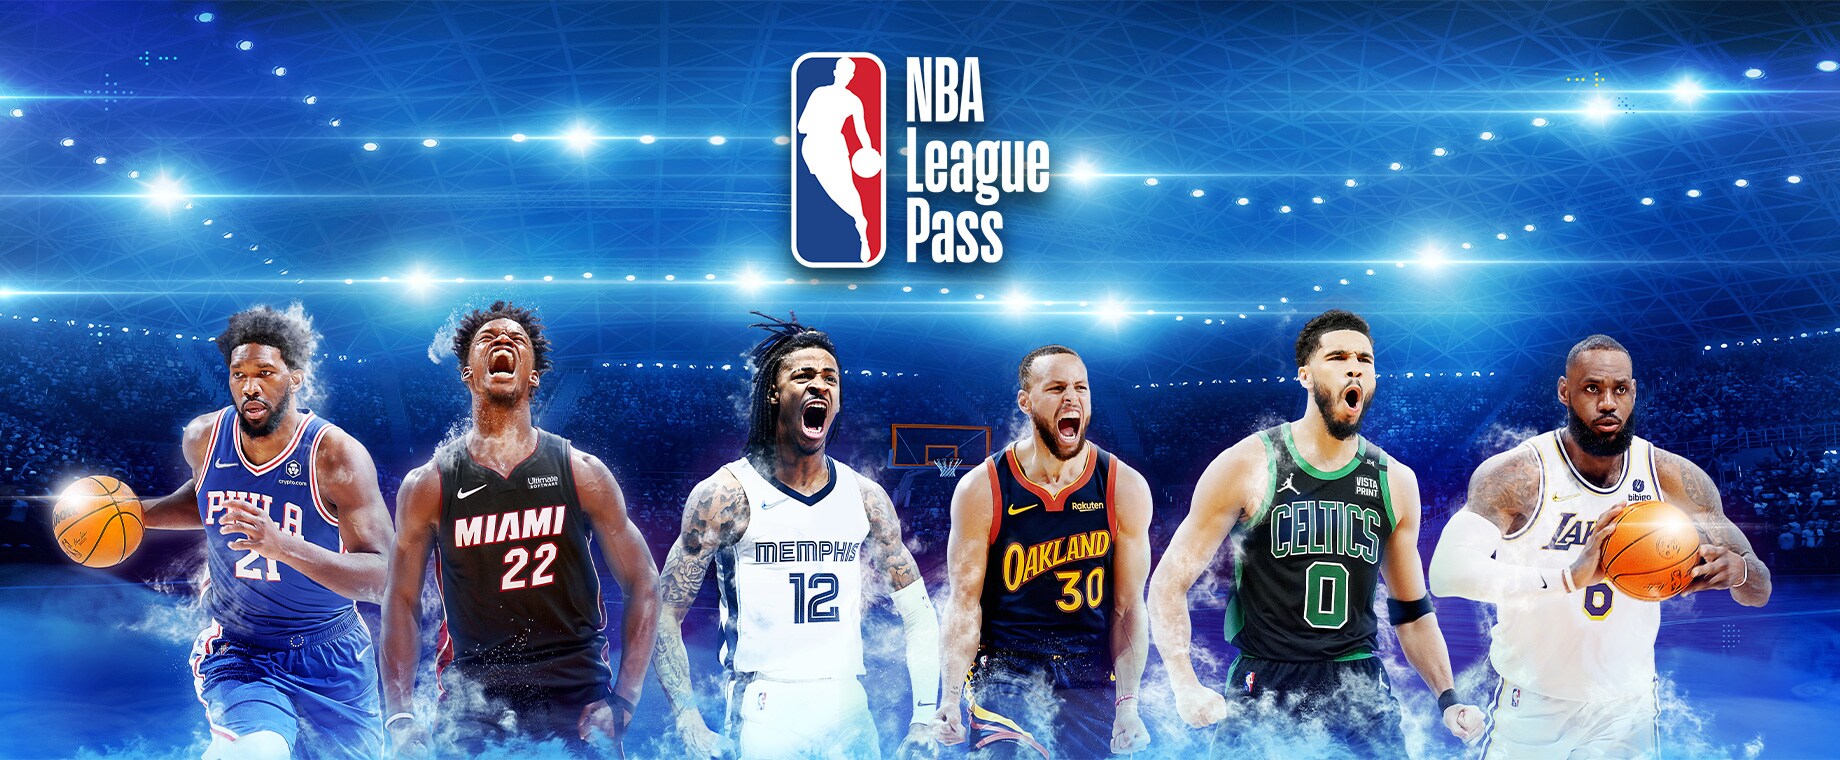 NBA league pass ad picture.